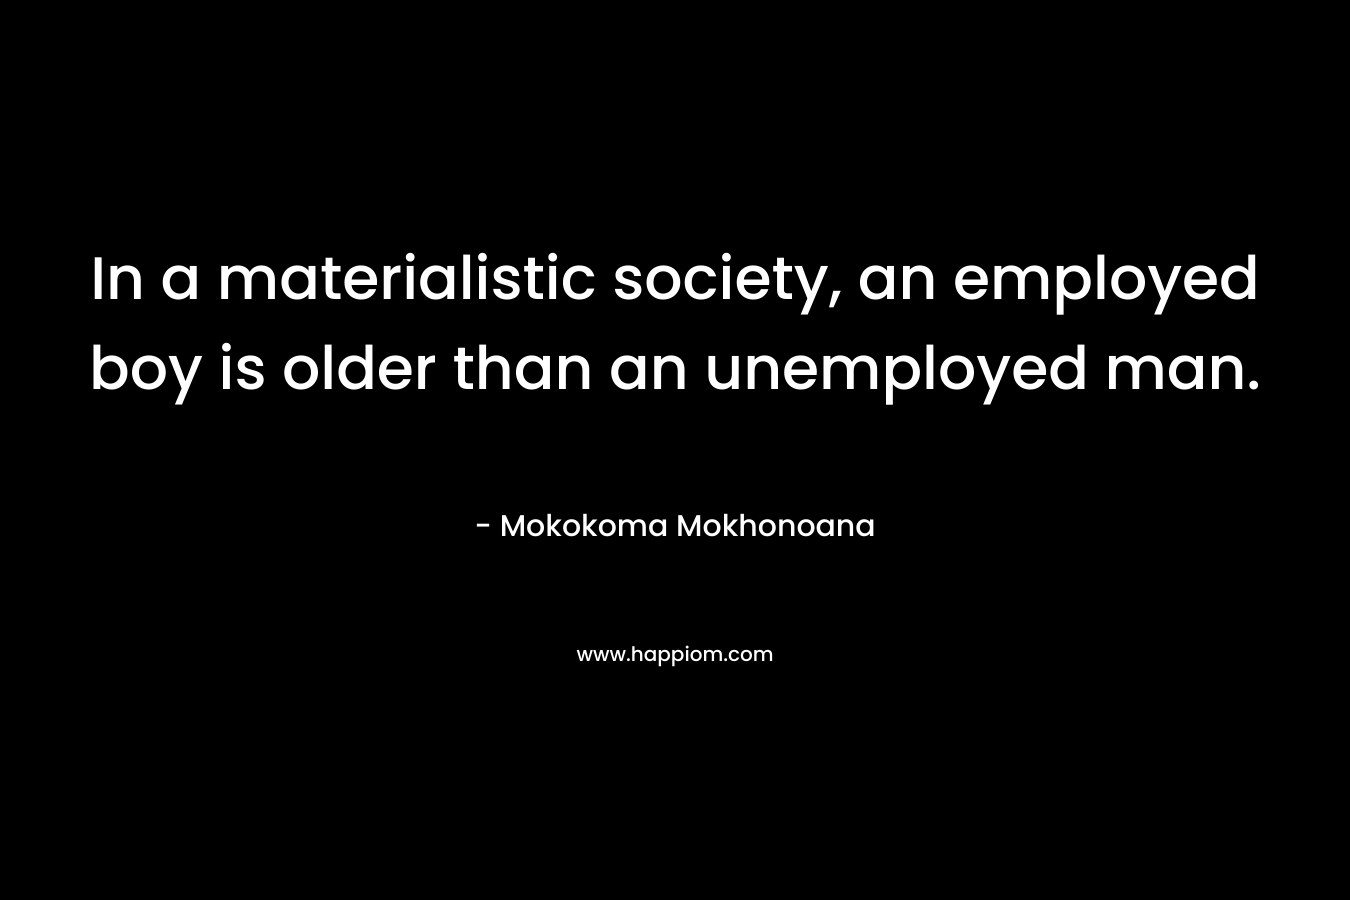 In a materialistic society, an employed boy is older than an unemployed man.